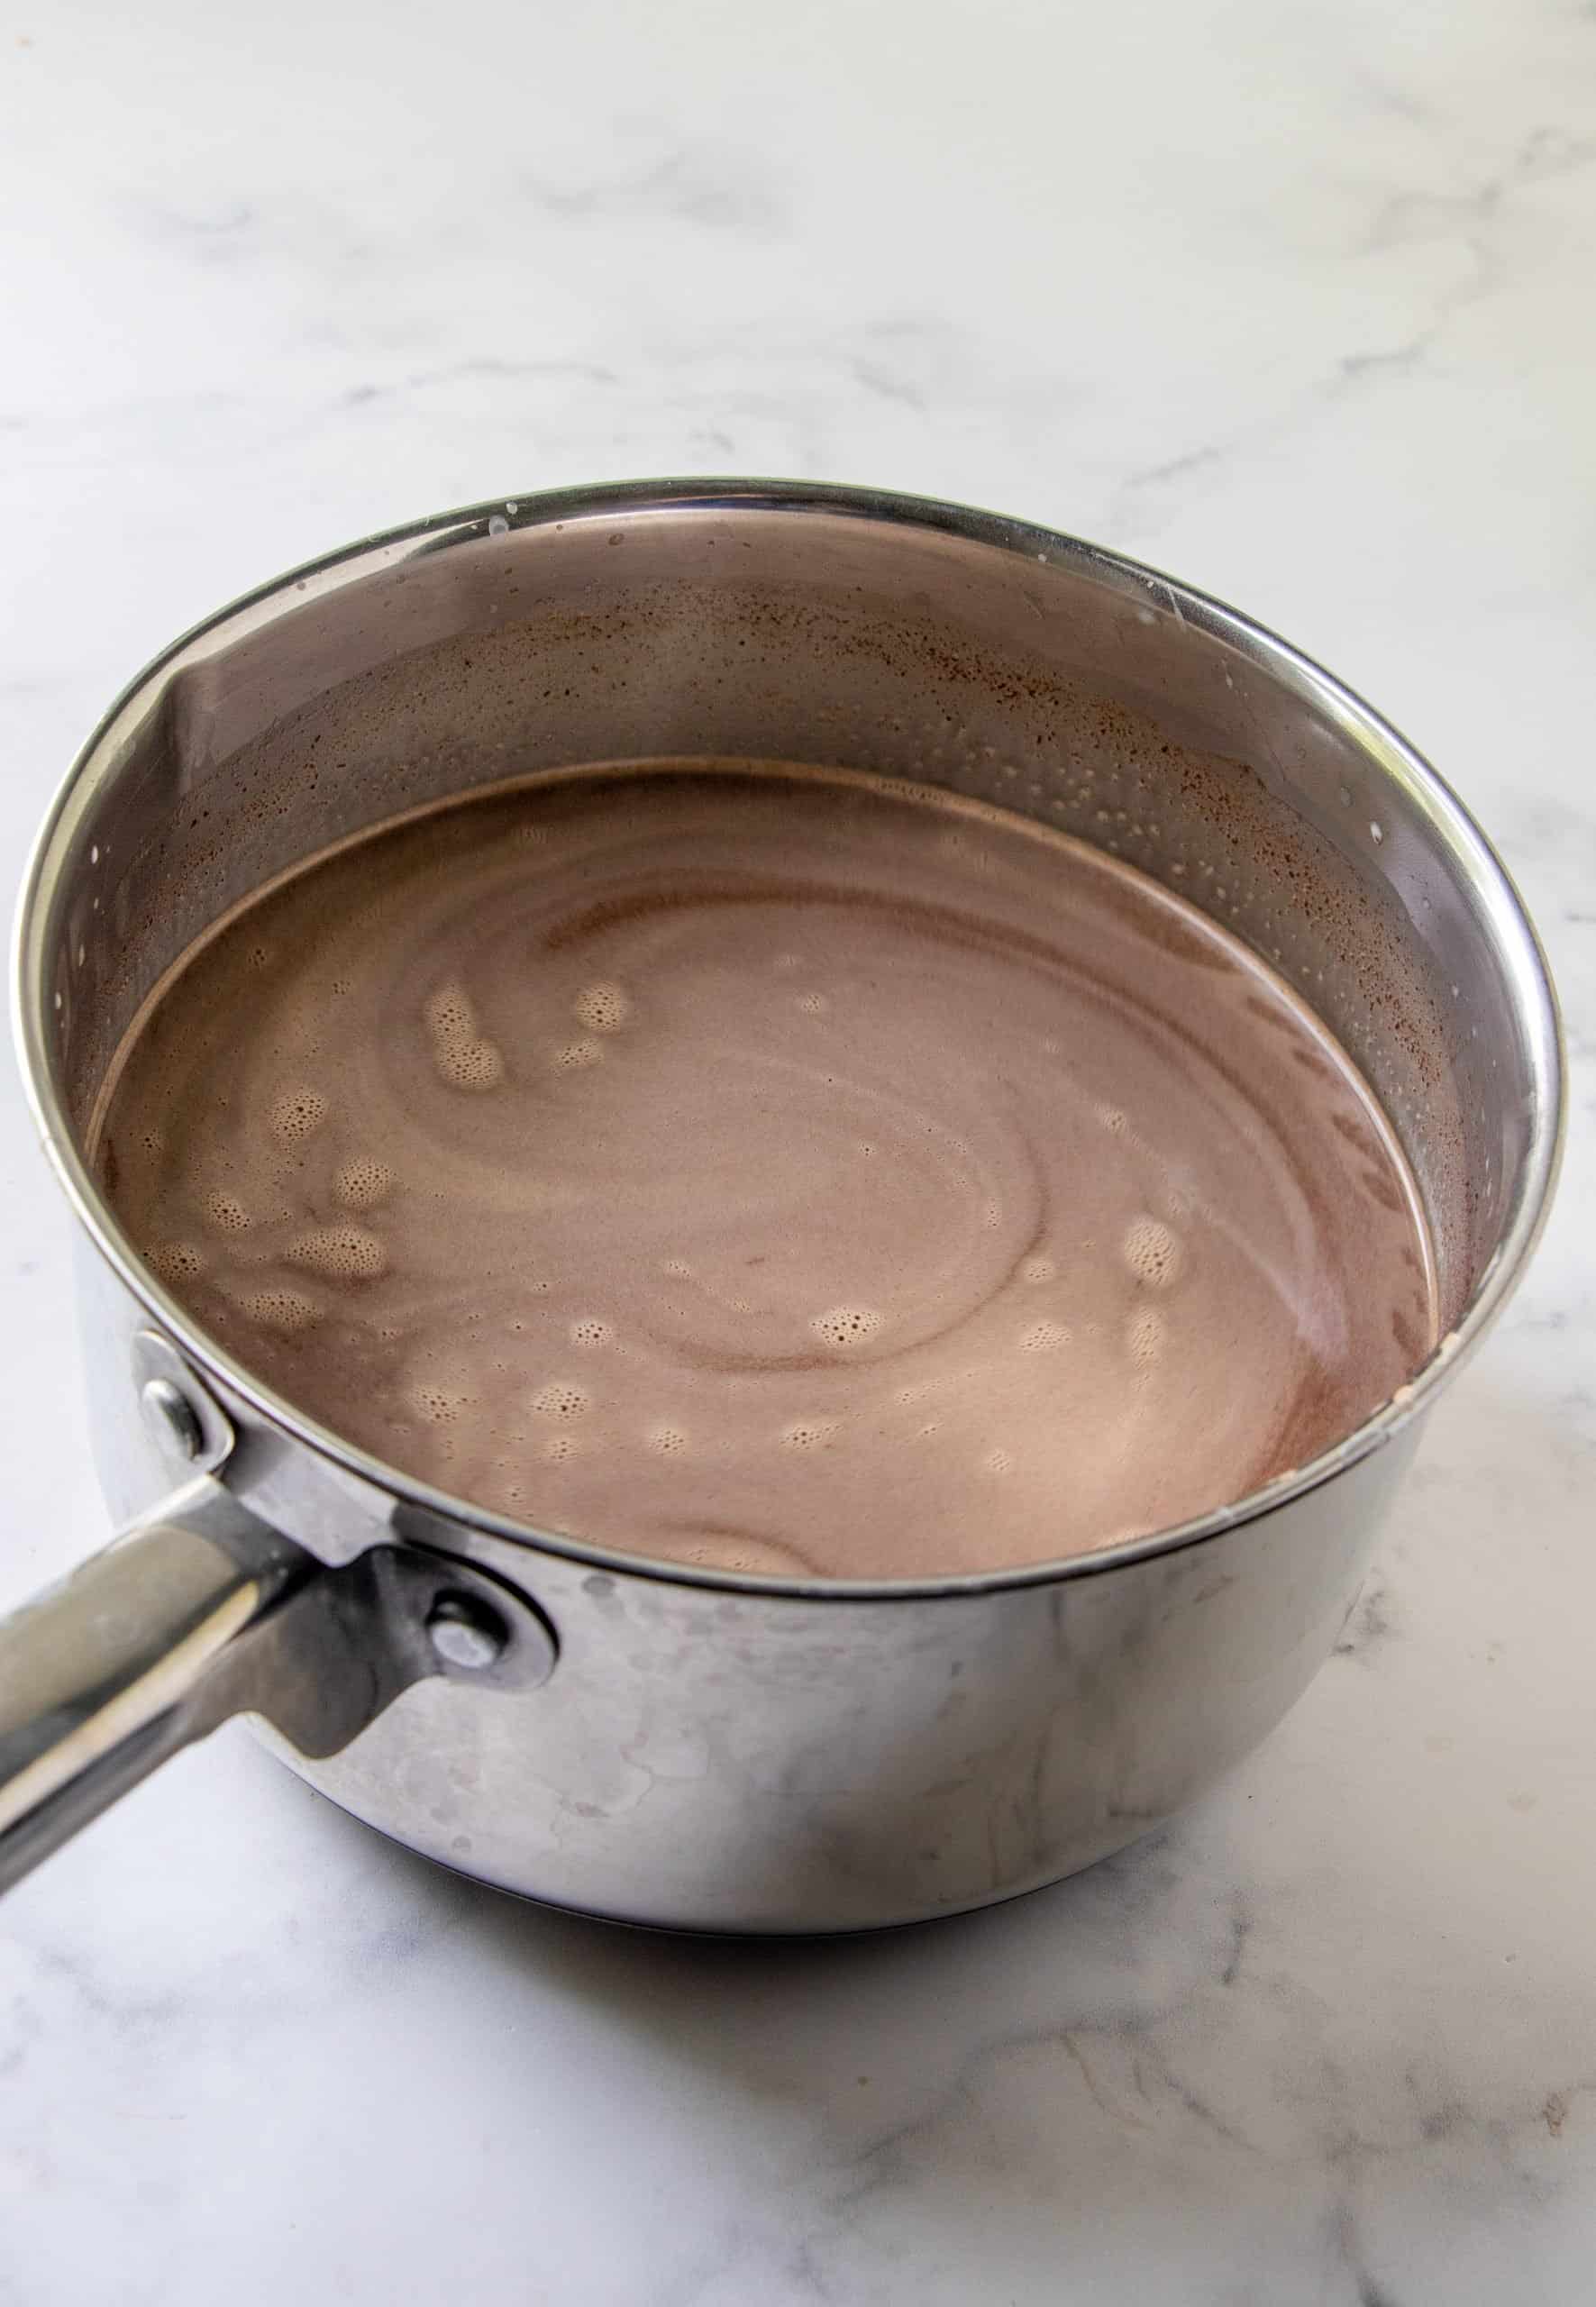 melting chocolate along with milk and sweetened condensed milk in a silver sauce pot.